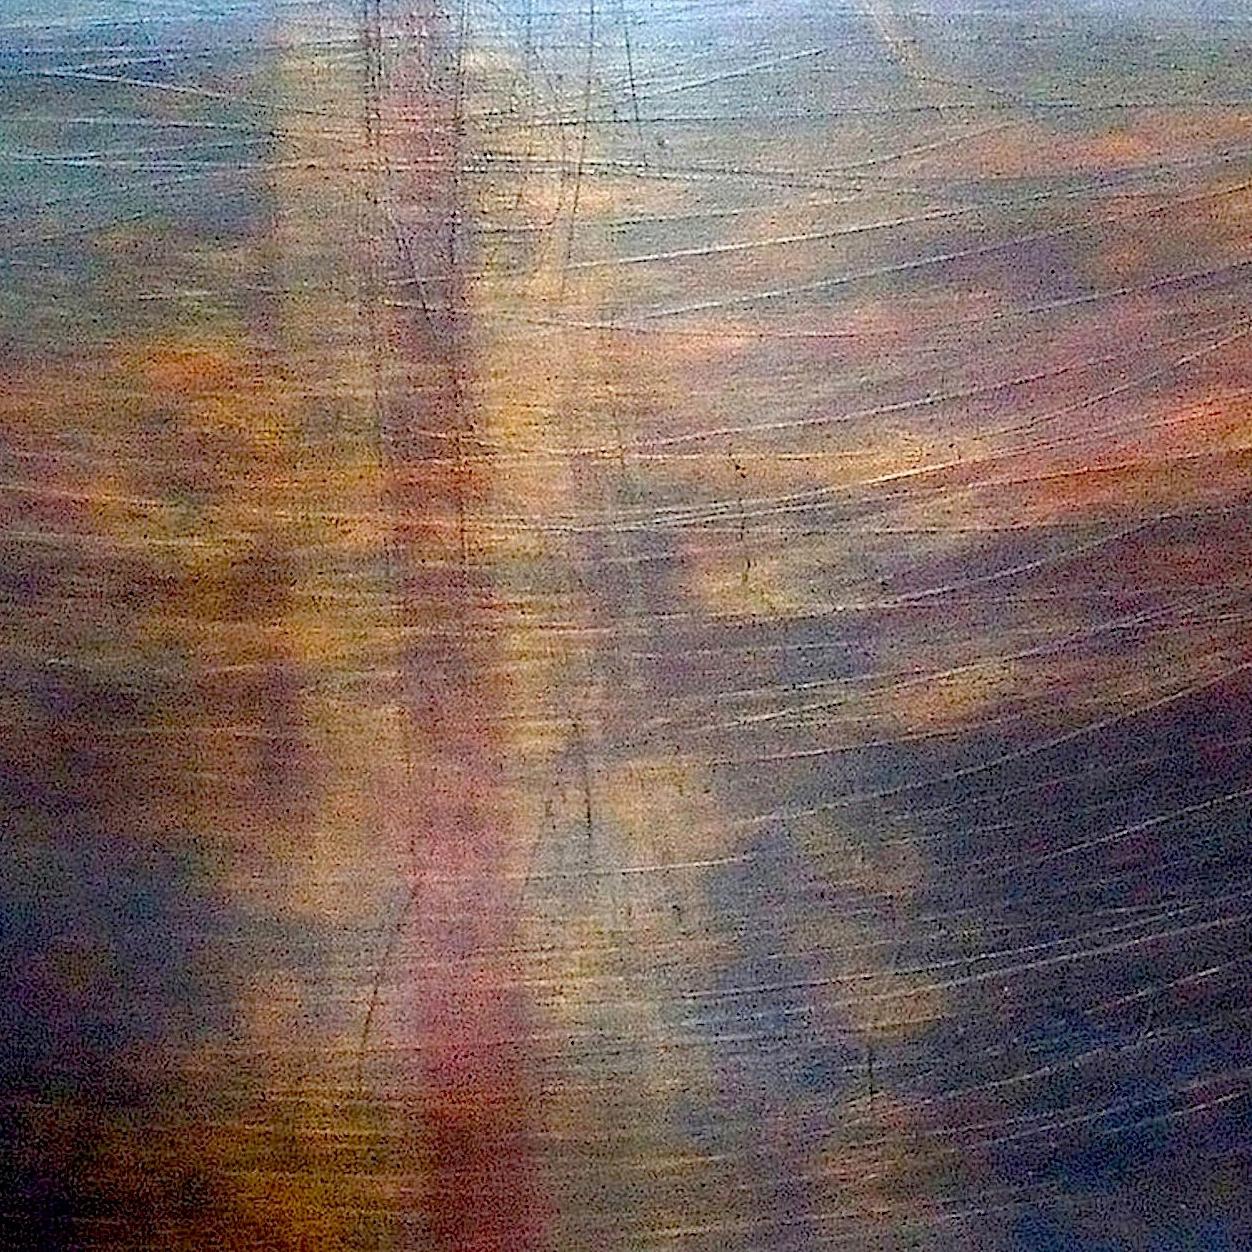 Lark Ascending - Gray Abstract Painting by Patricia McParlin